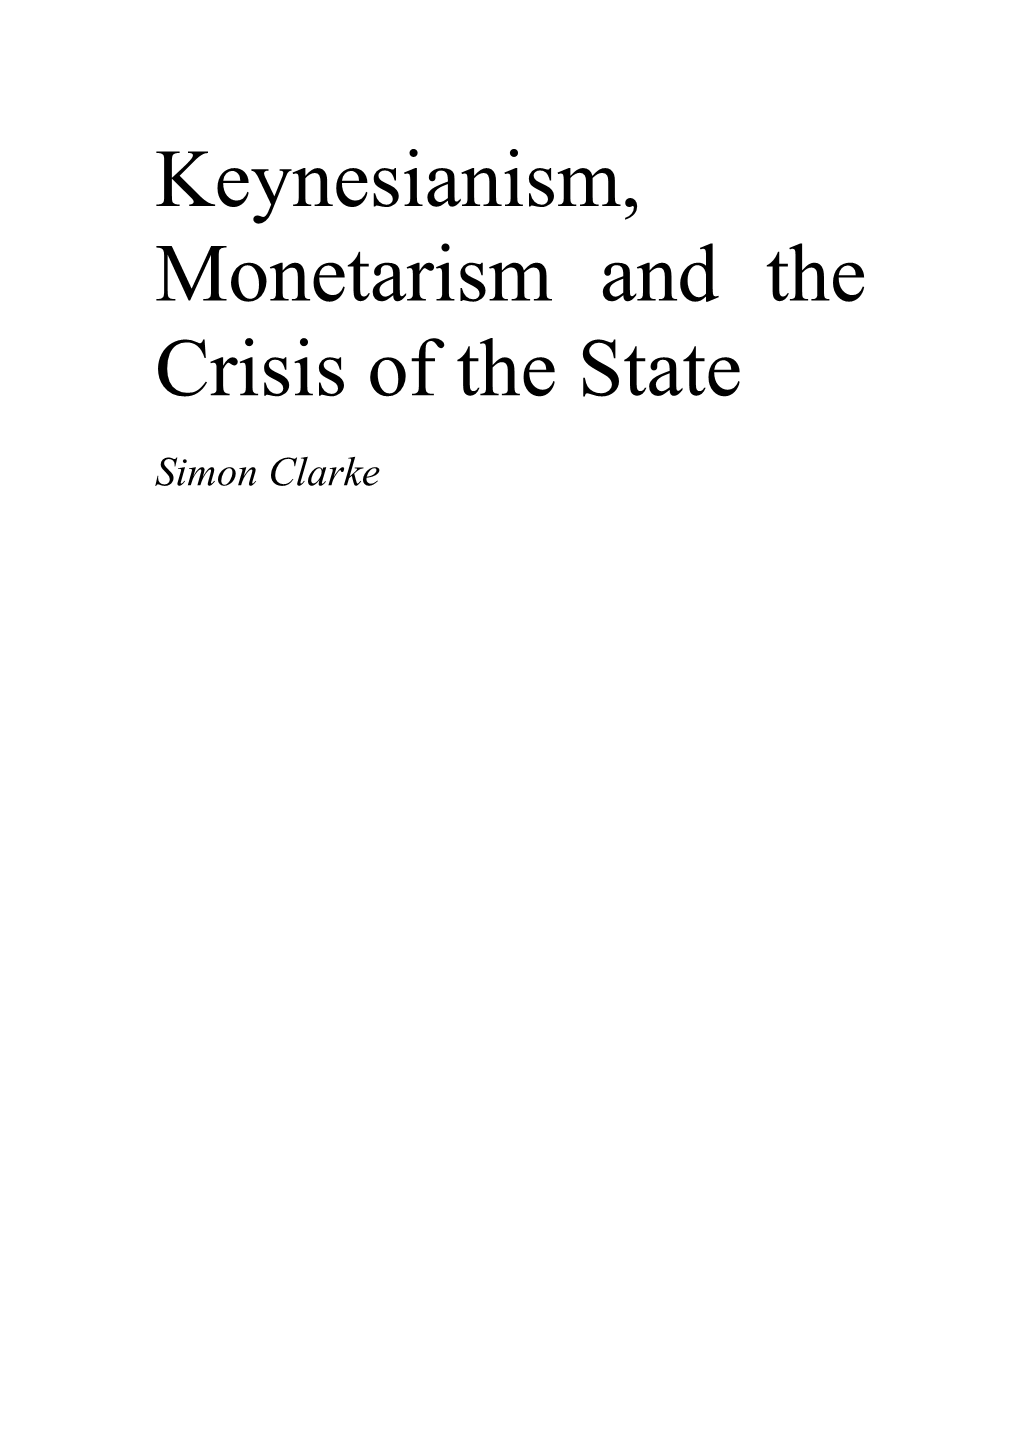 Keynesianism, Monetarism and the Crisis of the State